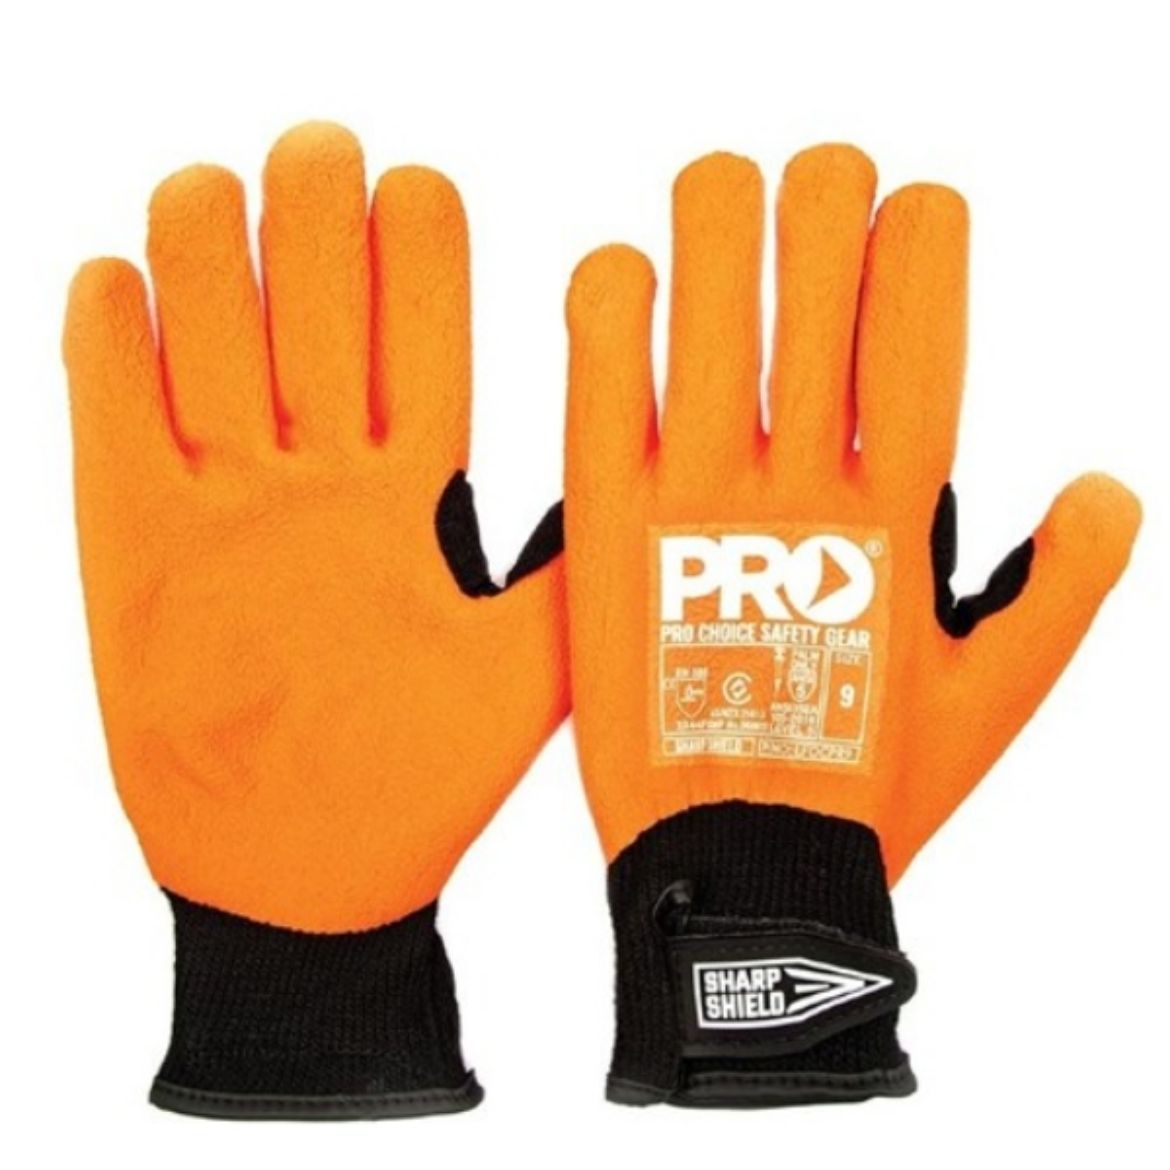 Picture of SHARP SHIELD ORANGE LATEX FULL DIP BLACK COTTON LINER NEEDLE & CUT RESISTANT PALM. AVAILABLE IN SIZES 7/8/9/10/11/12